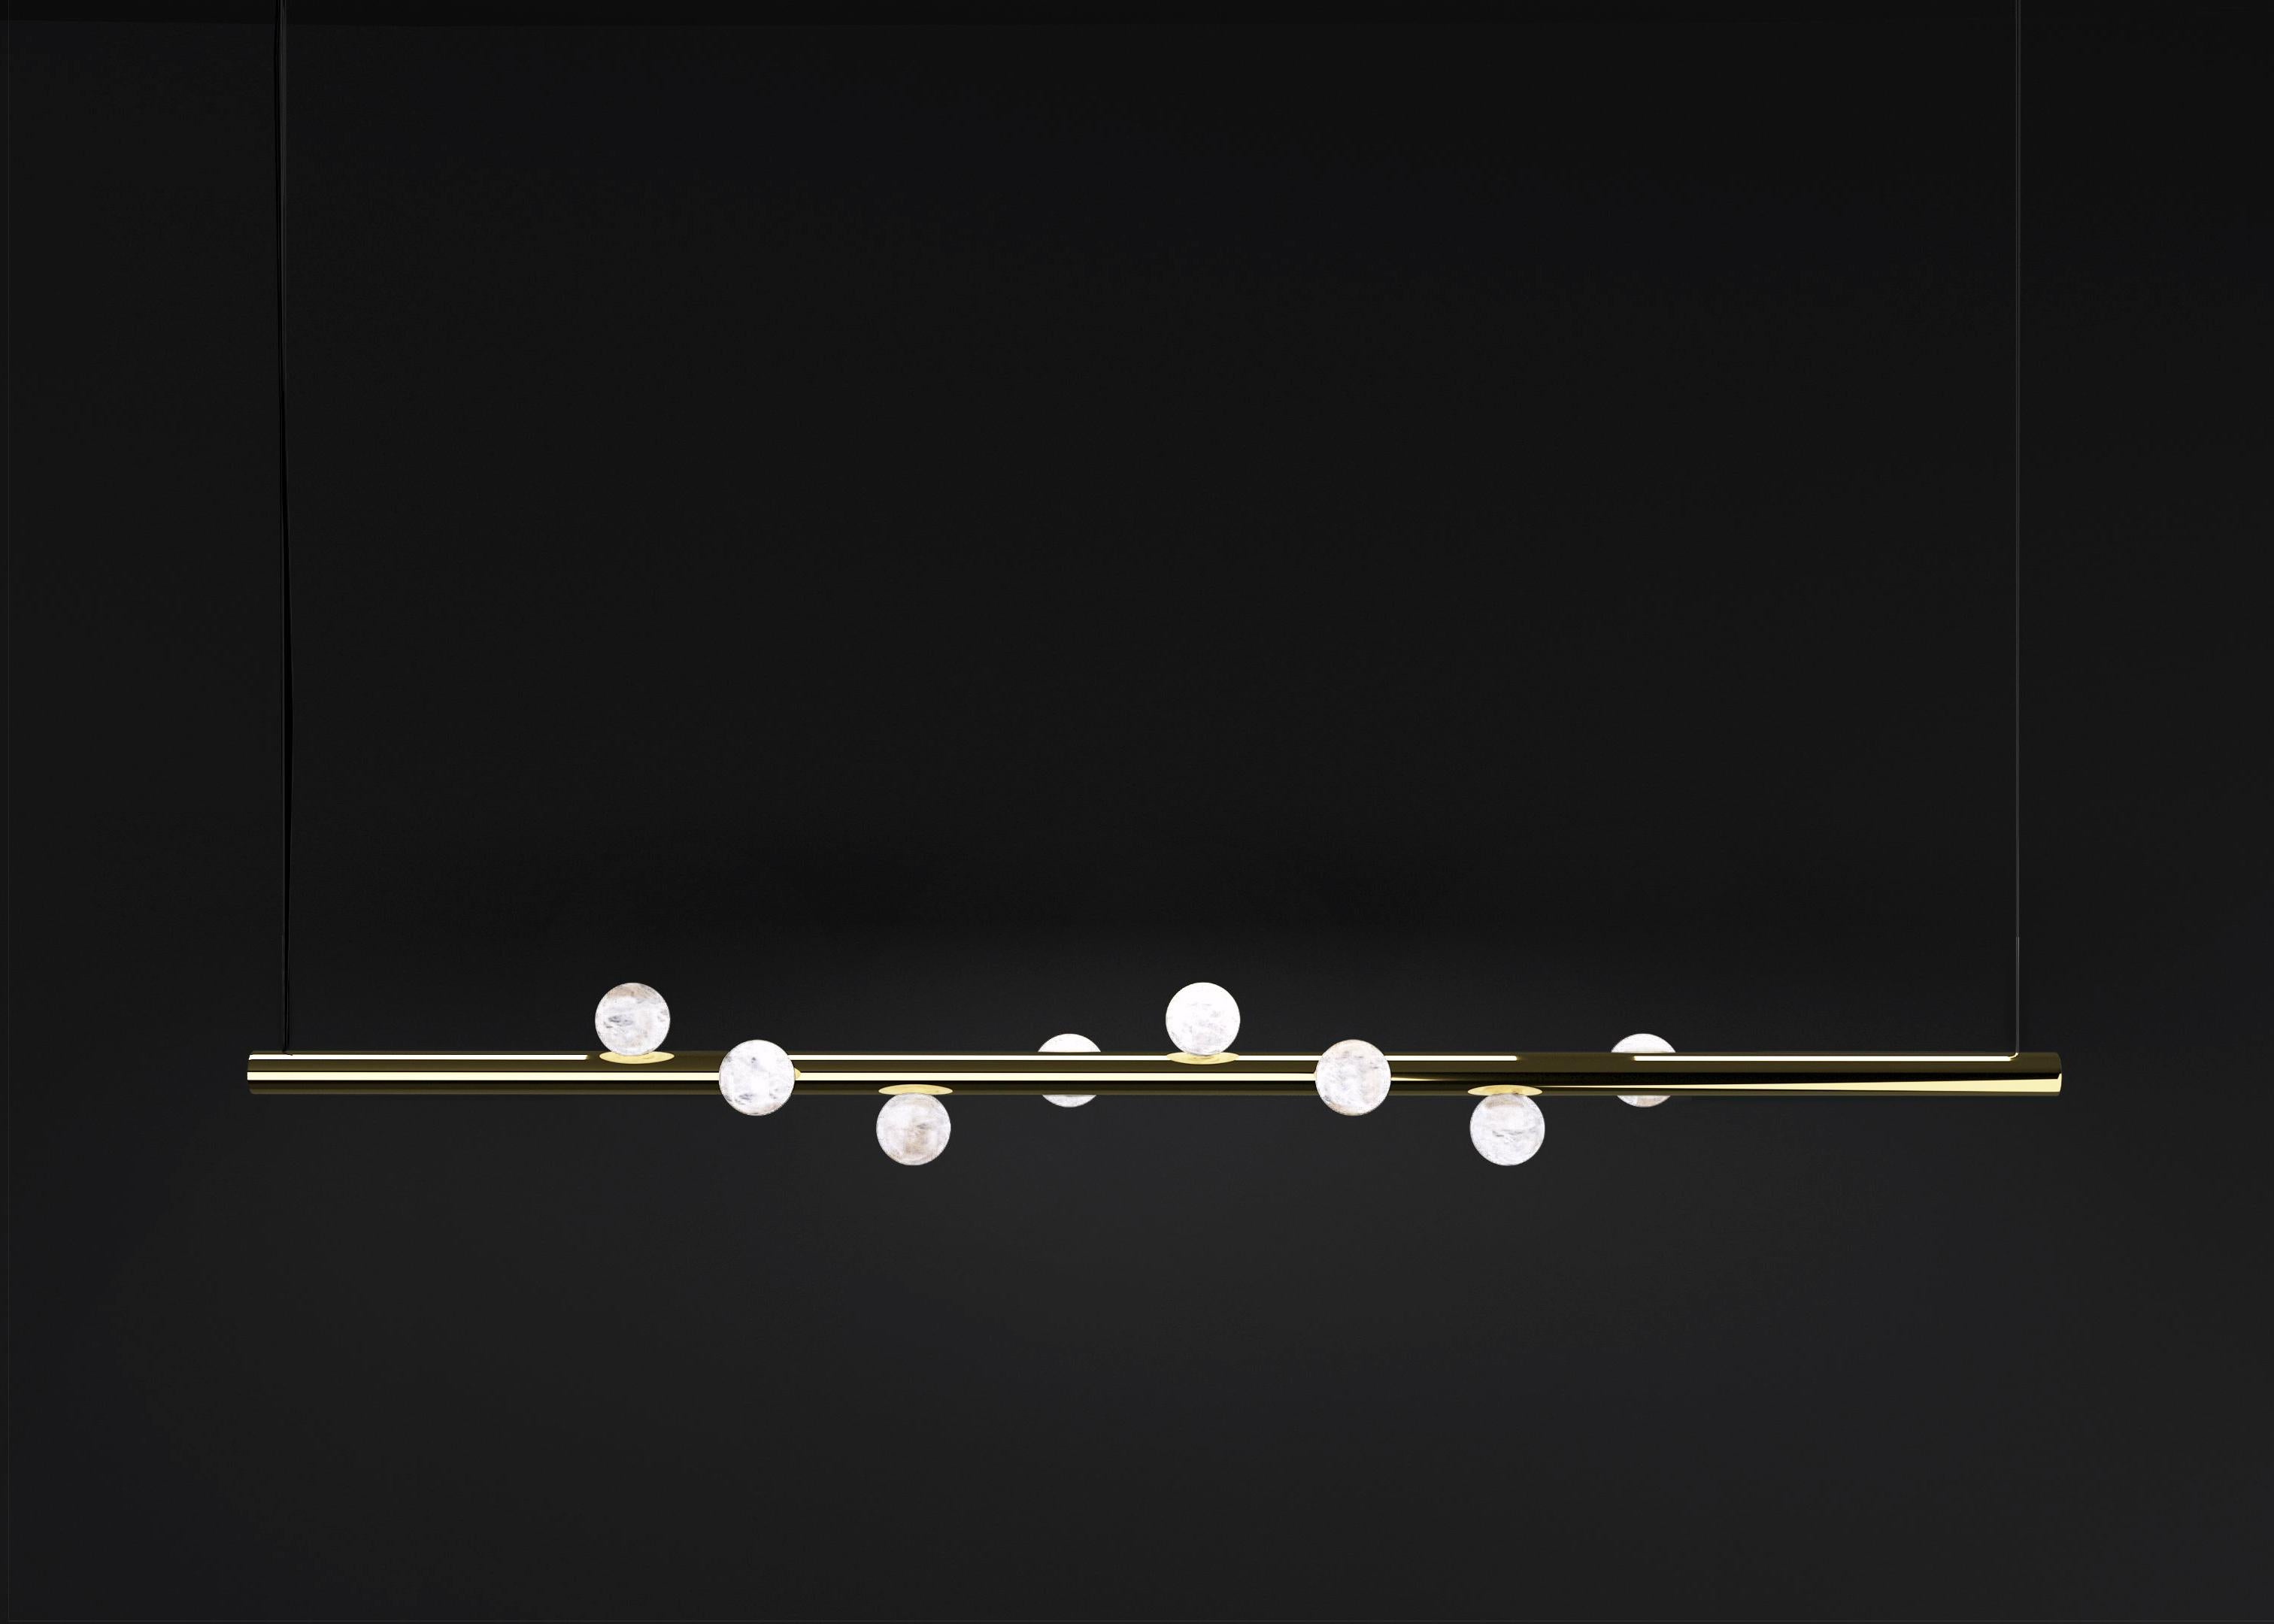 Demetra Shiny Gold Metal Pendant Lamp 1 by Alabastro Italiano
Dimensions: D 12 x W 120 x H 12 cm.
Materials: White alabaster, shiny gold metal and leather.

Available in different finishes: Shiny Silver, Bronze, Brushed Brass, Ruggine of Florence,